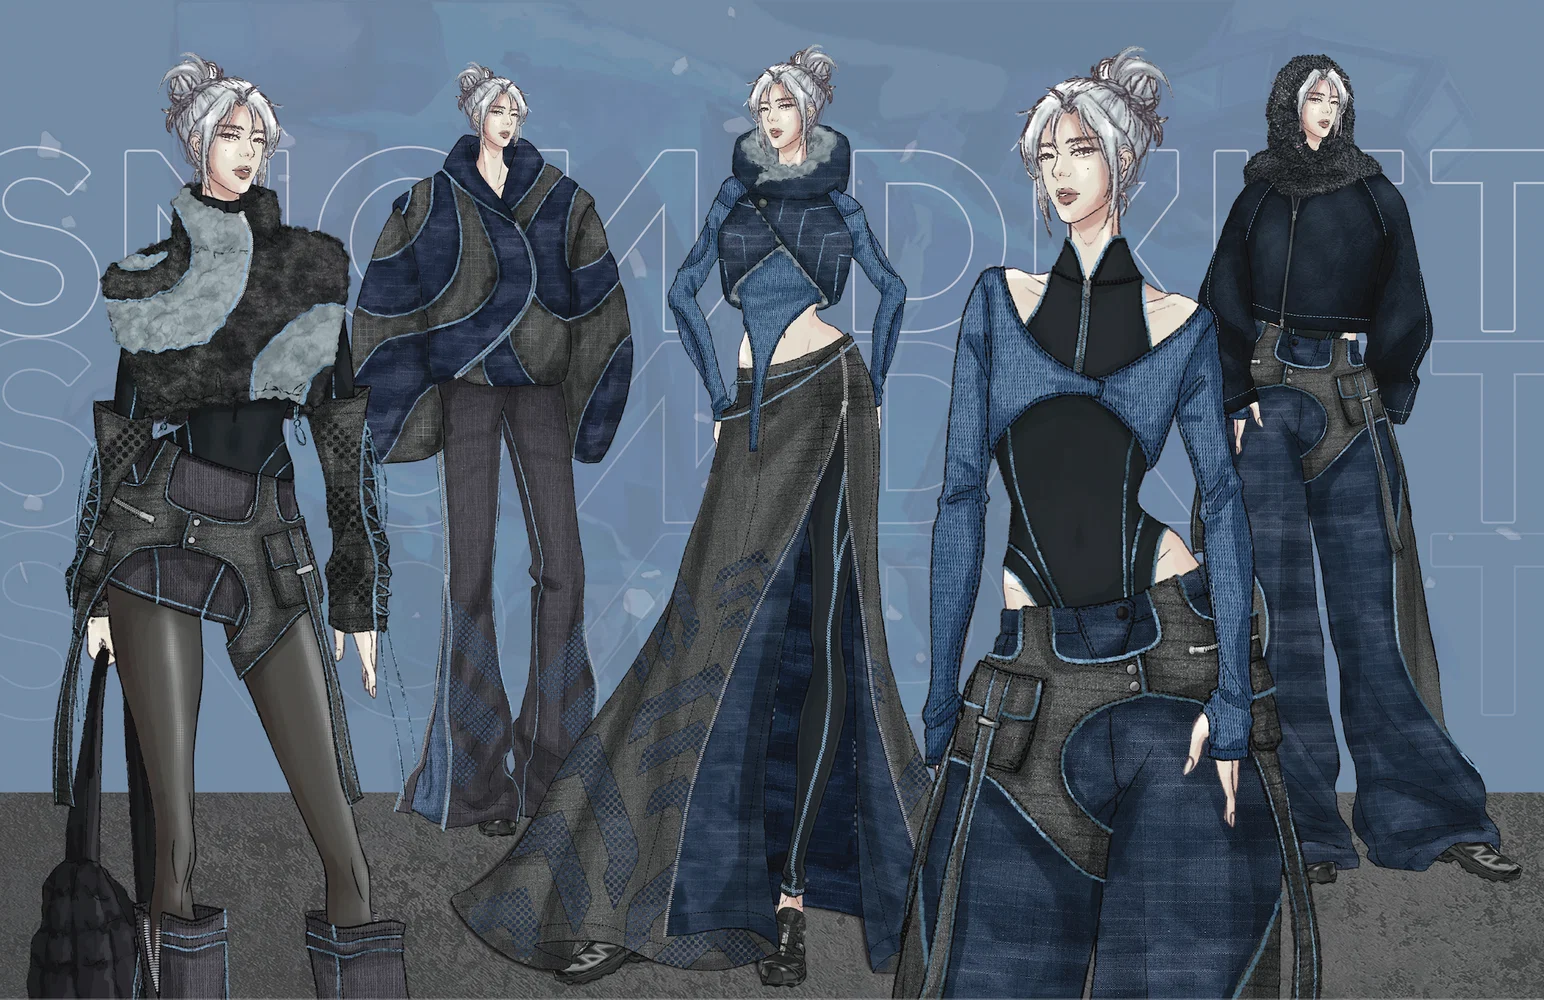 Illustration line up for RTW collection based off of game character.